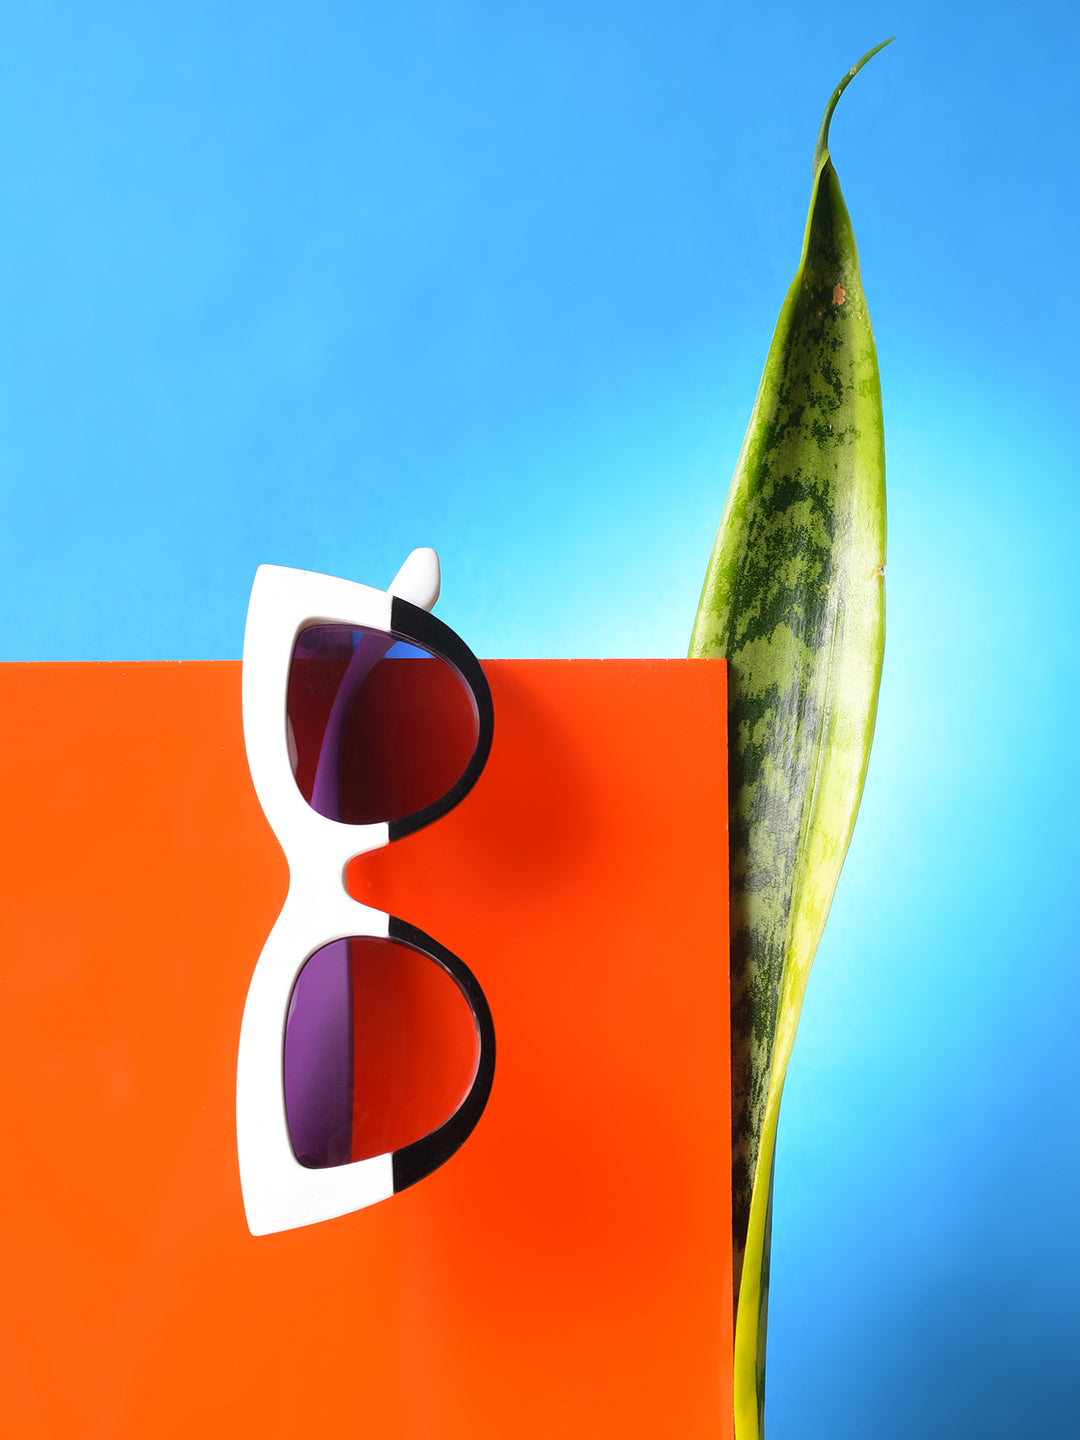 Add A Pop Of Color To Every Look With These Vibrant Sunglasses.